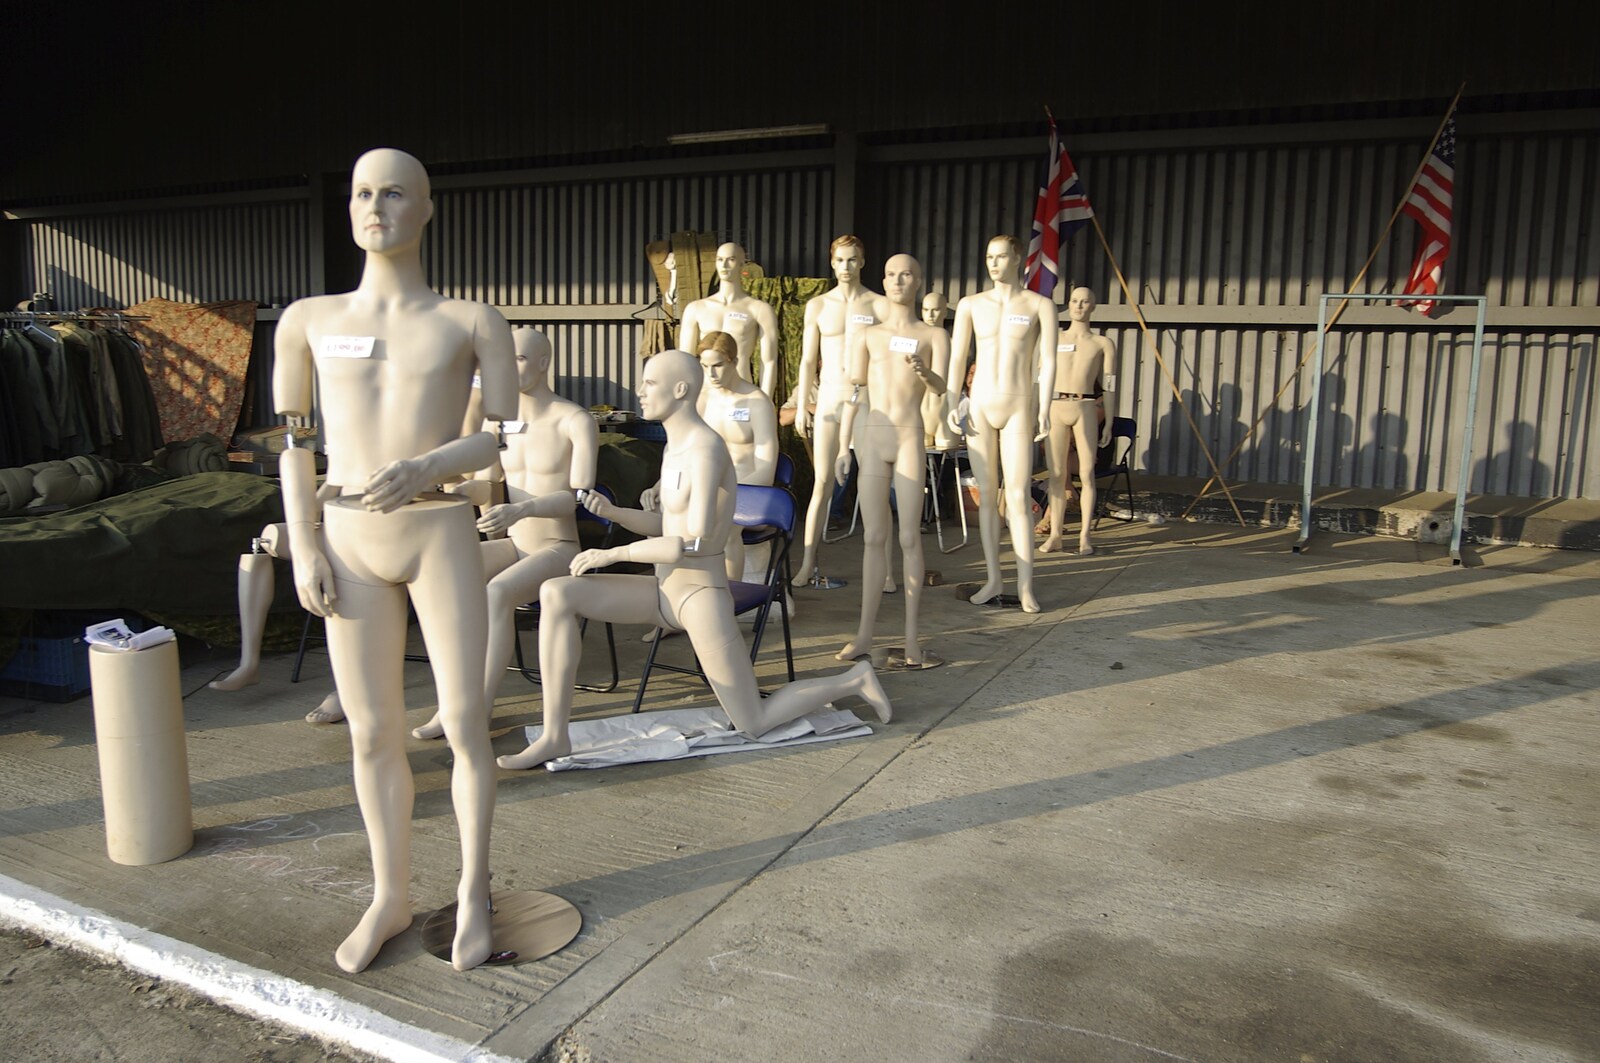 A 1940s Airfield Hangar Dance, Debach, Suffolk - 9th June 2007: In a nearby shed, the bizarre sight of lots of naked male mannequins